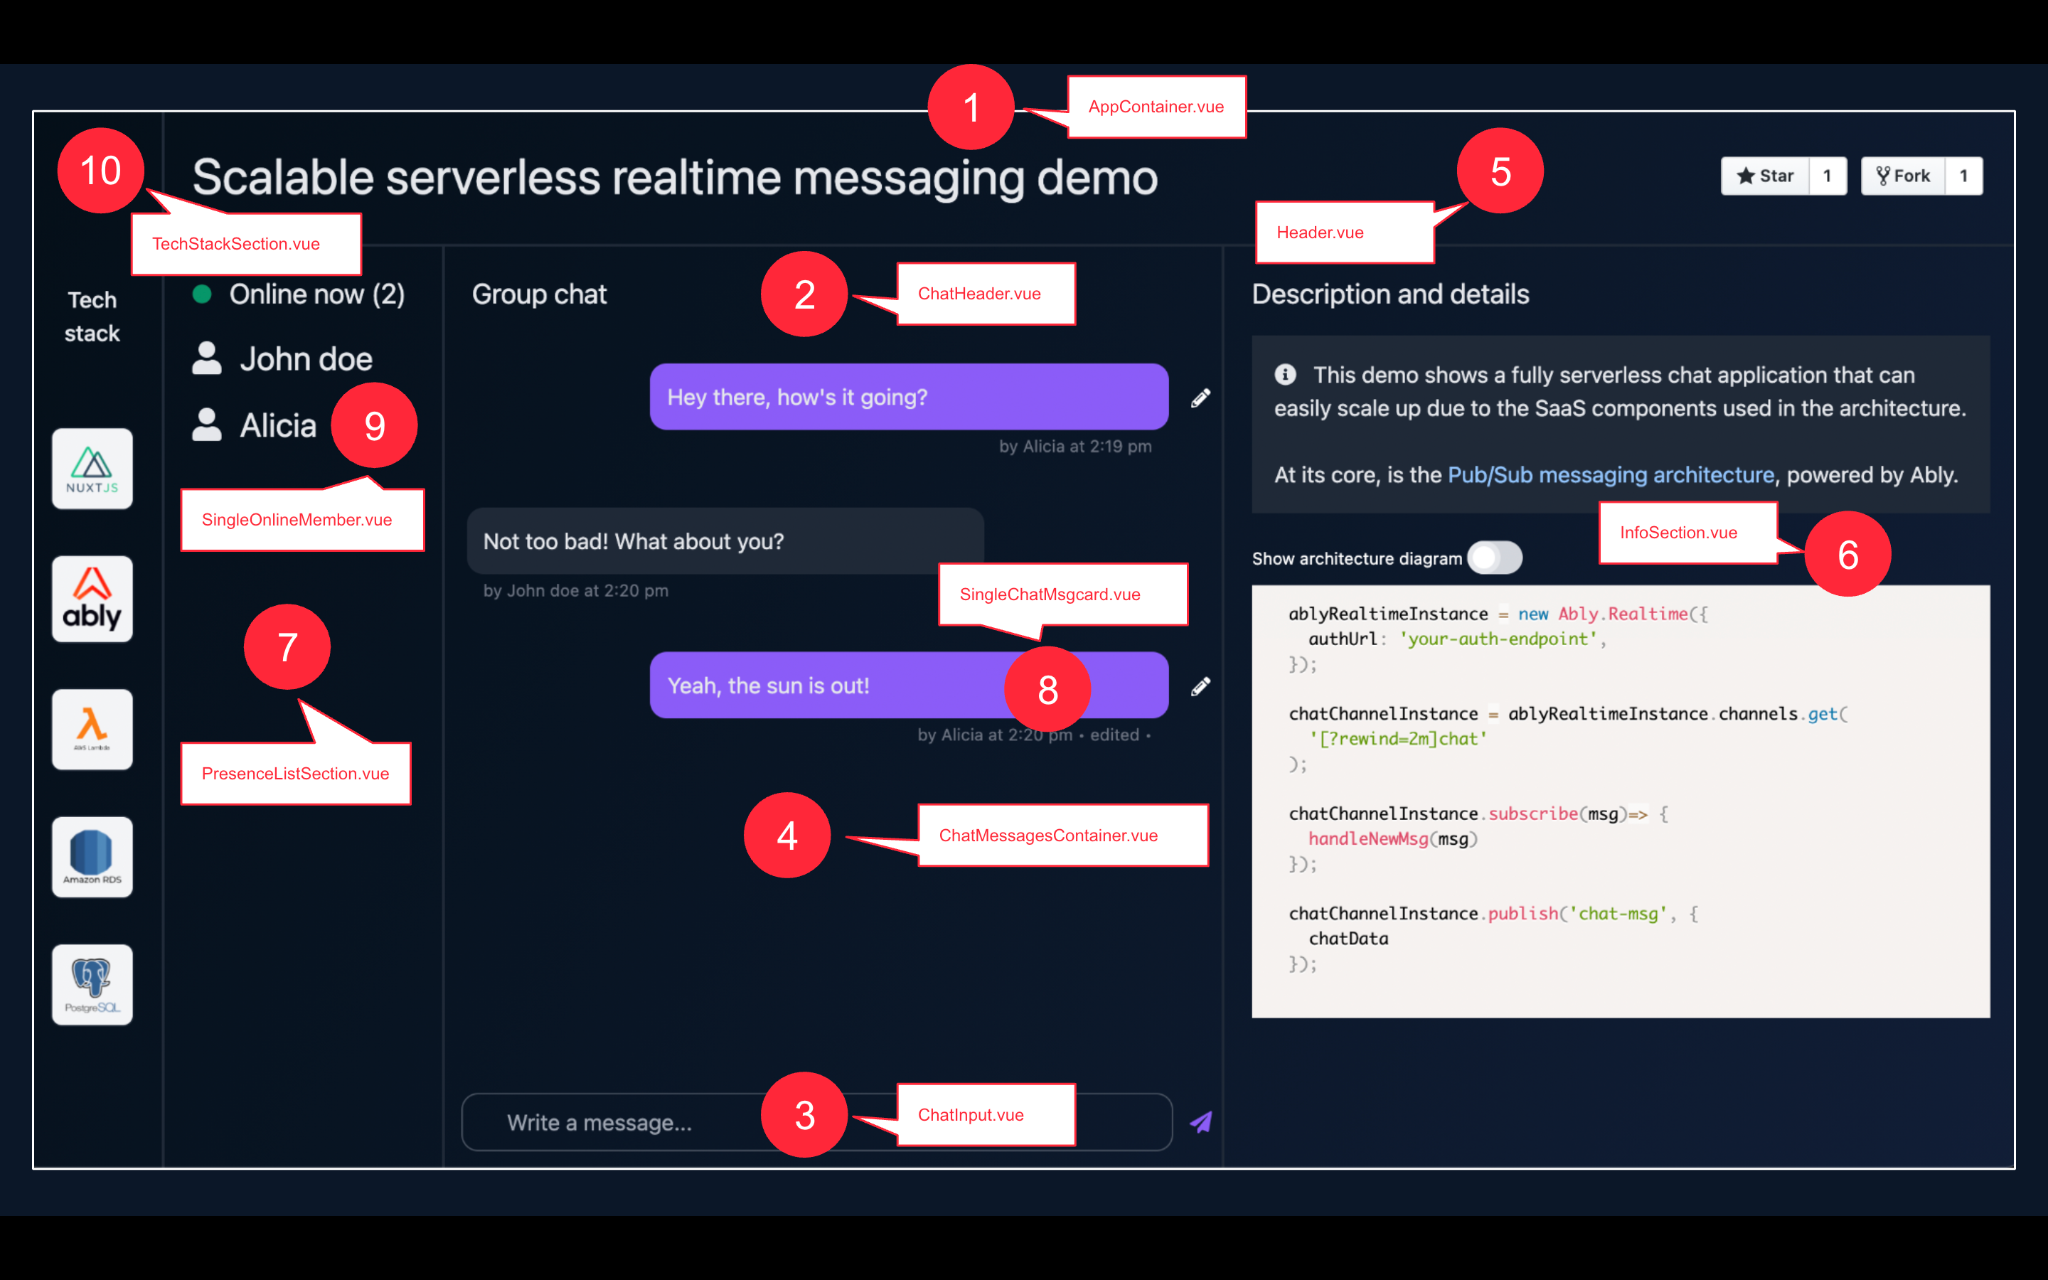 The Vue componentes of the editable chat app